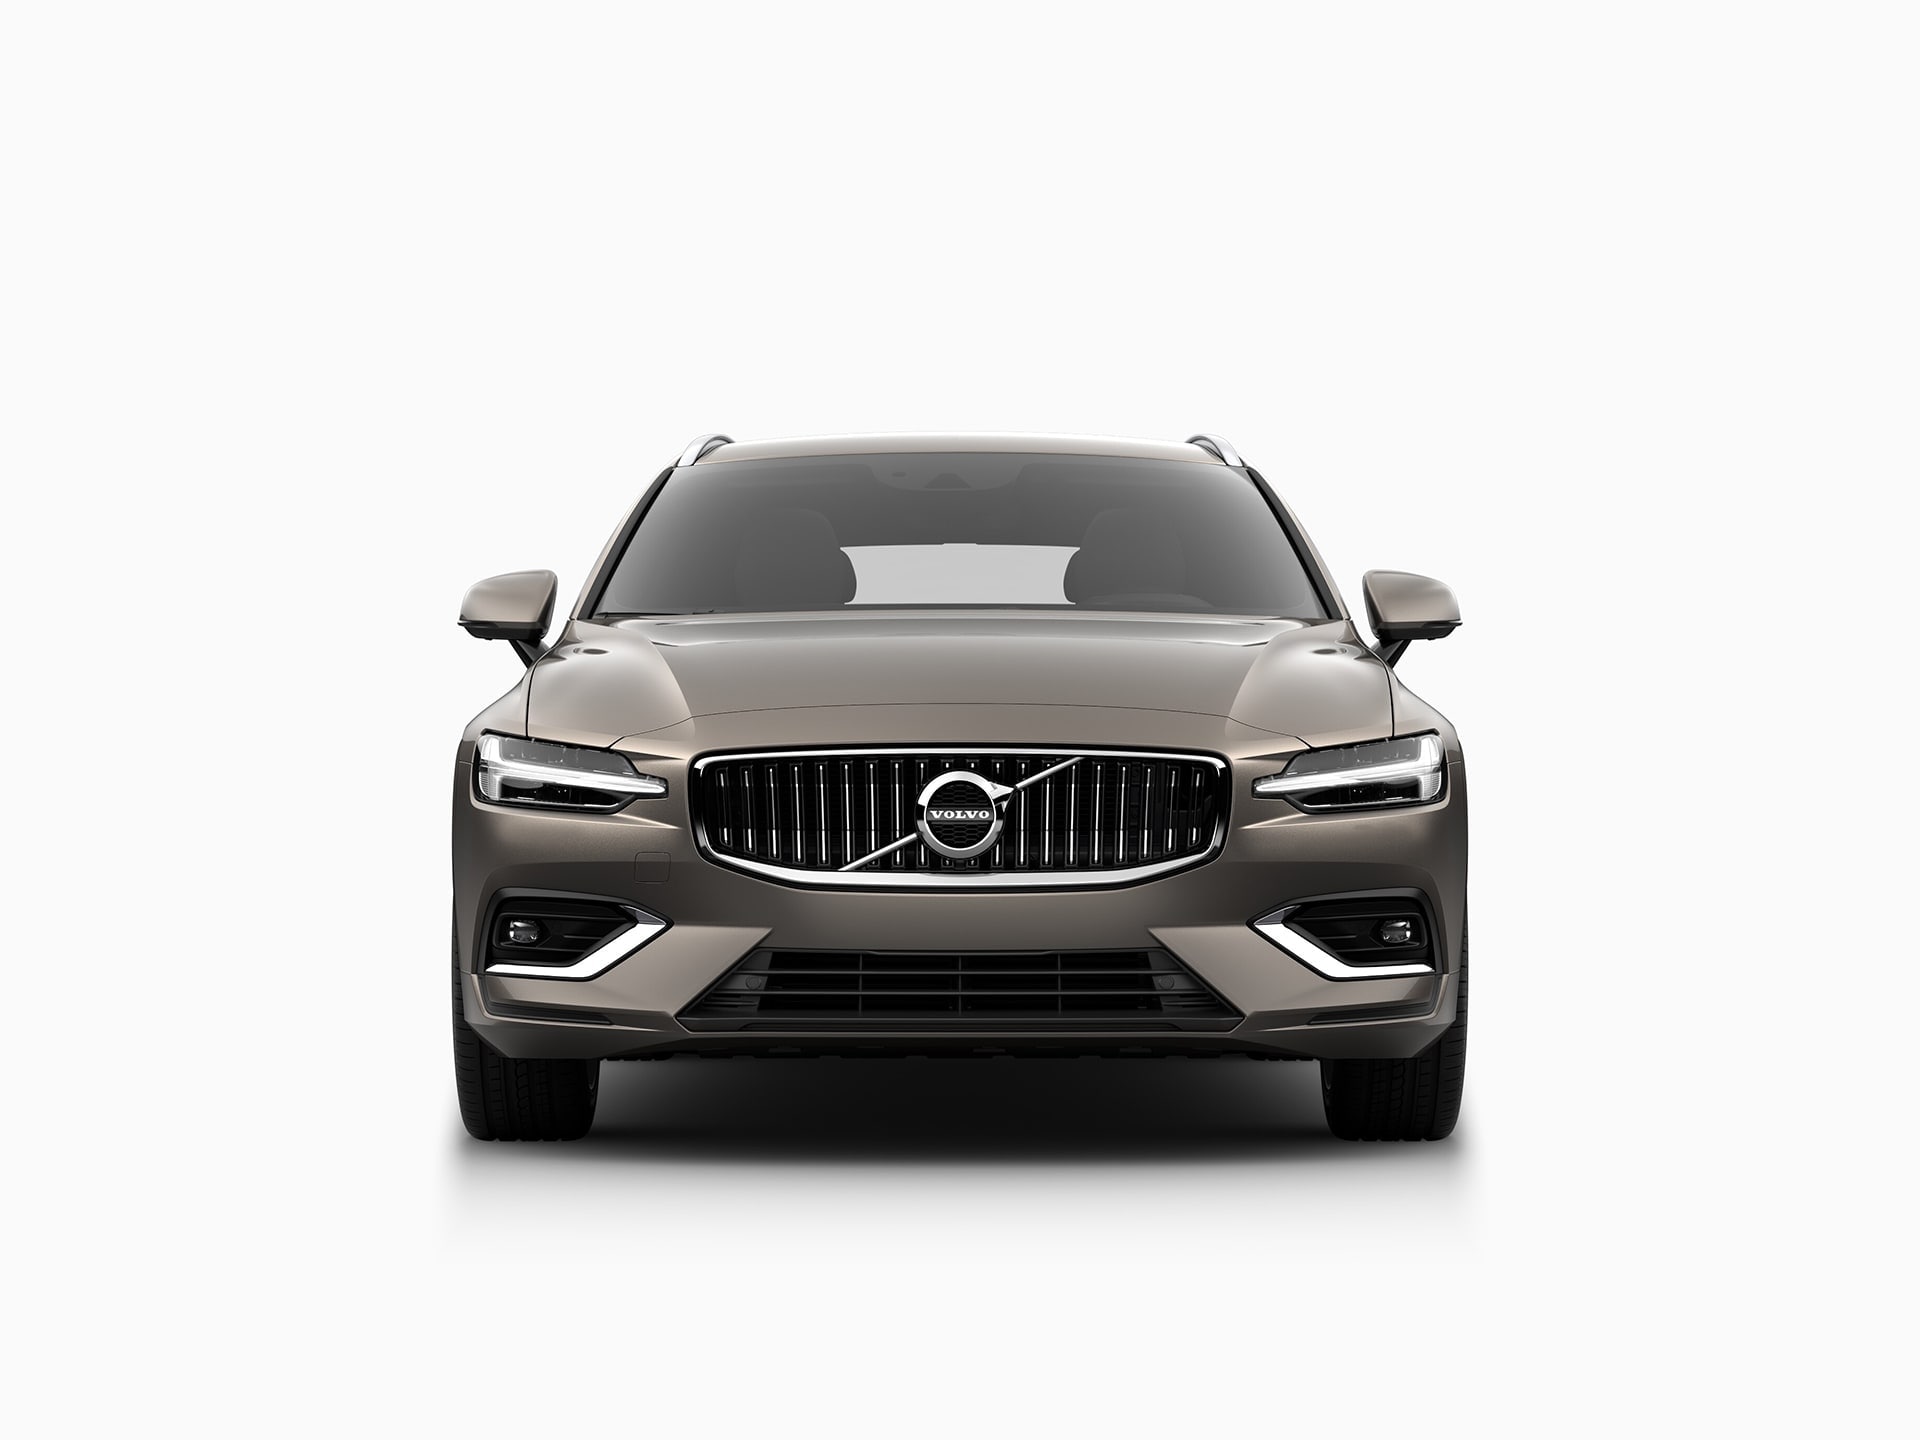 The front of a Volvo V60.